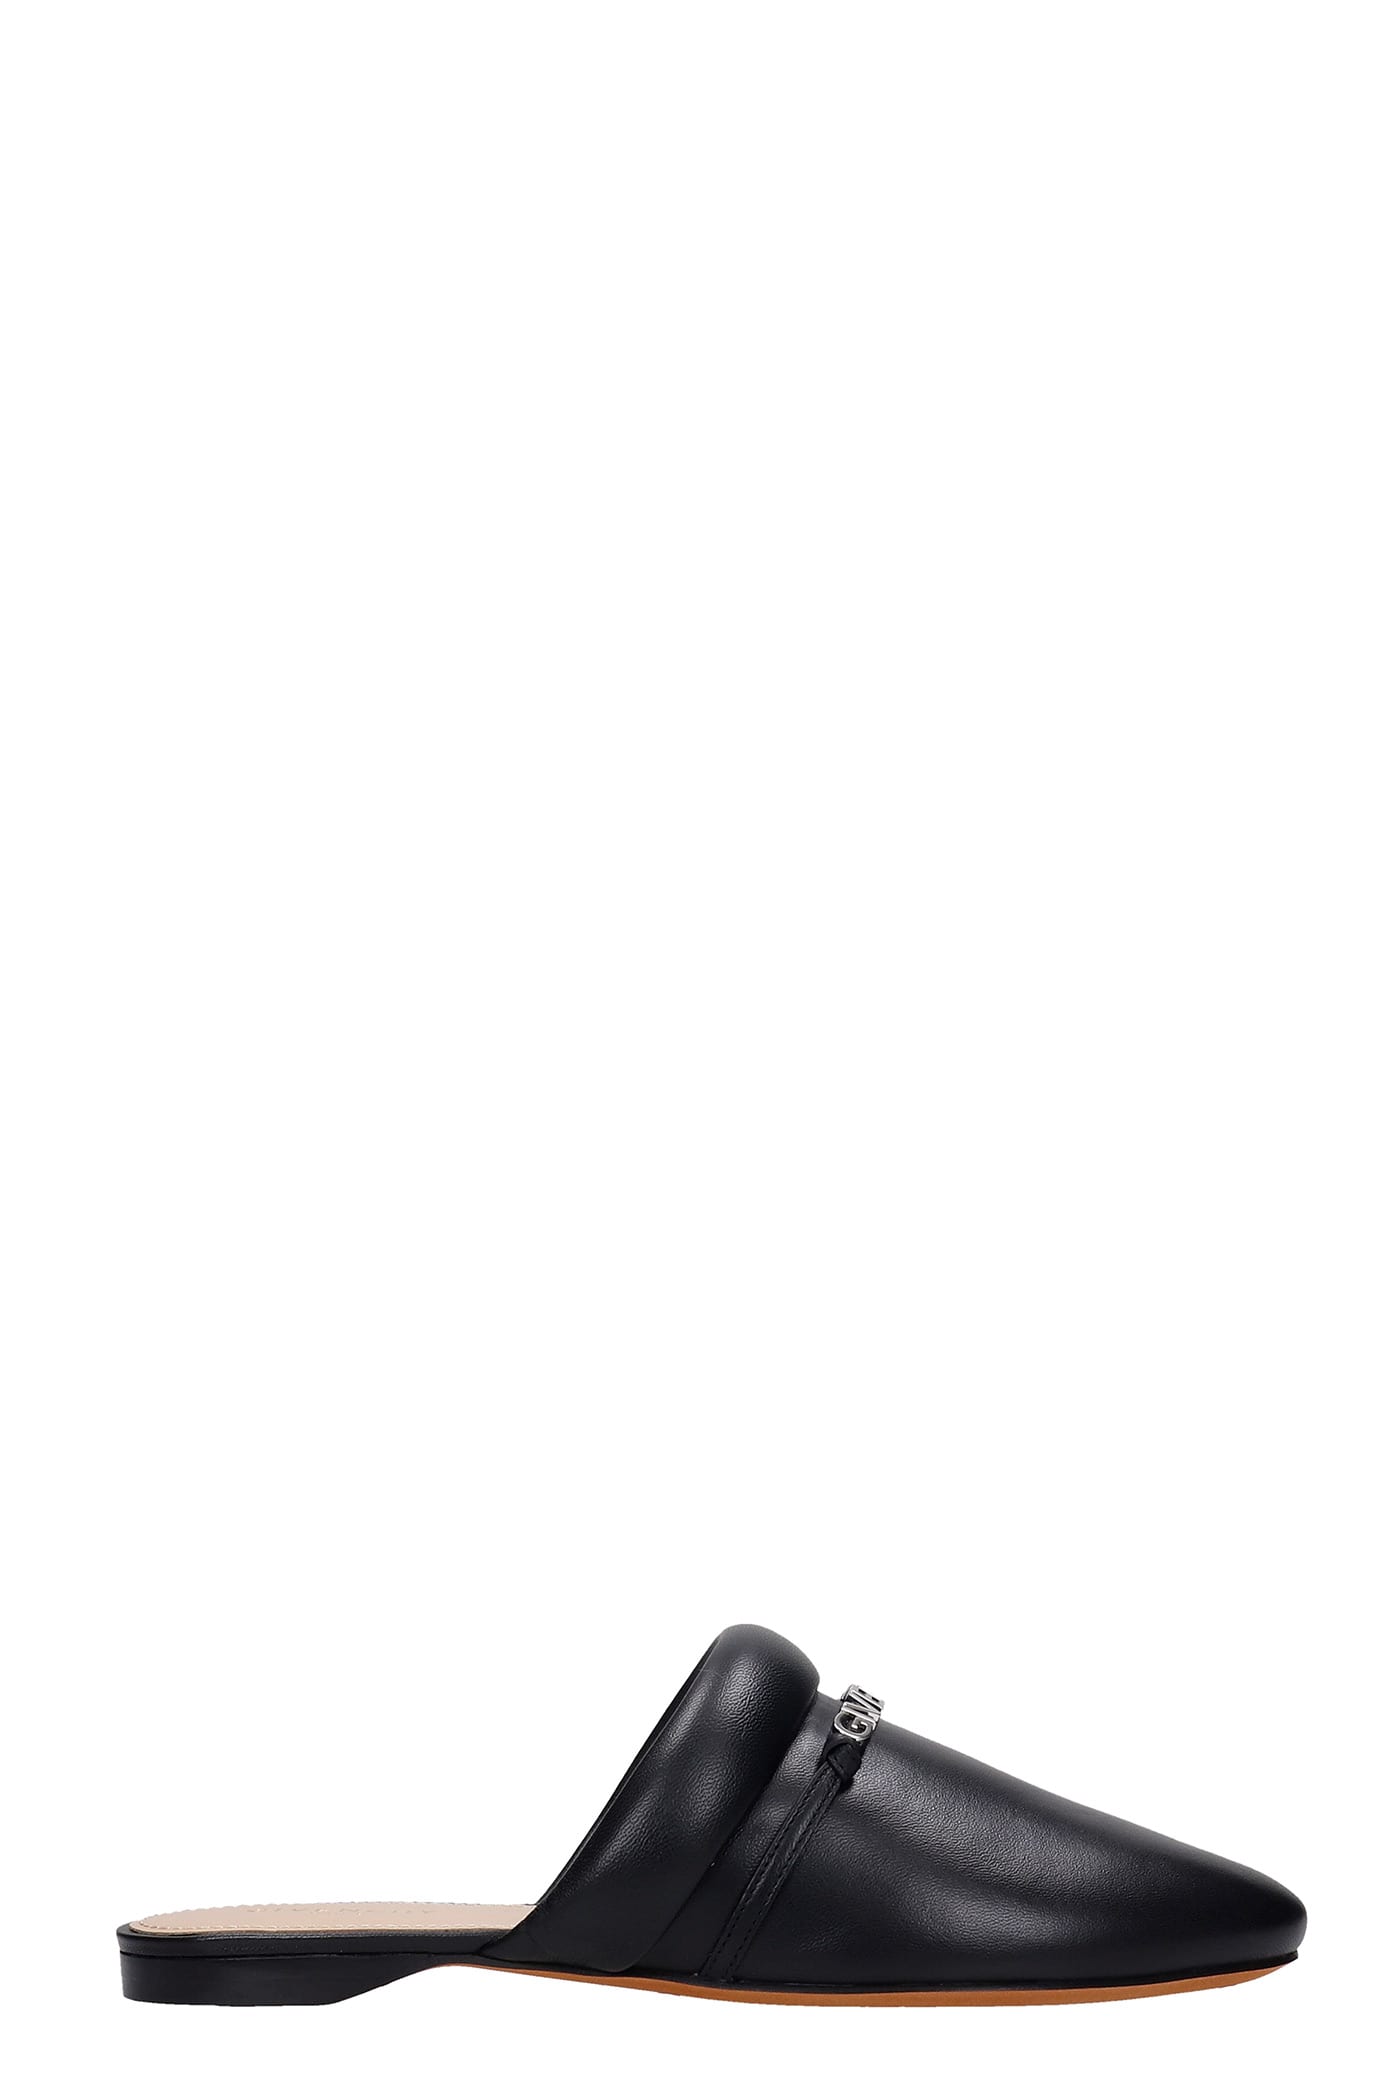 Buy Givenchy Elba Loafers In Black Leather online, shop Givenchy shoes with free shipping